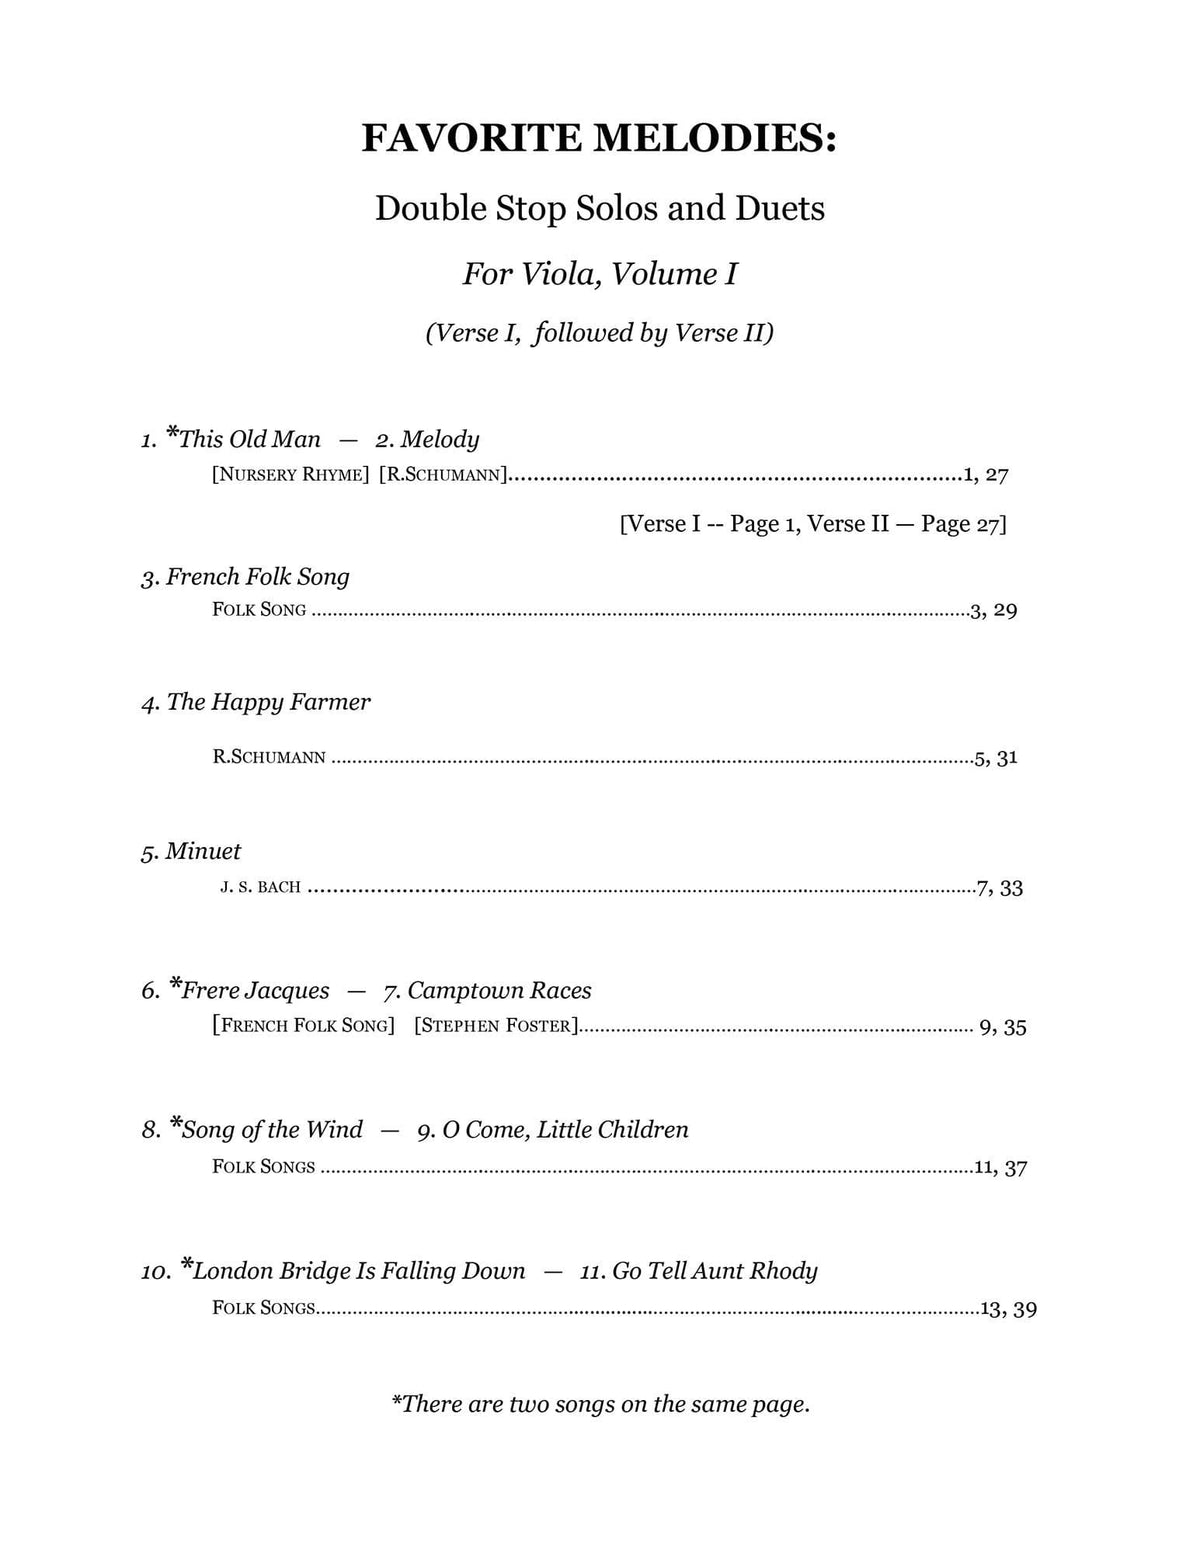 Yasuda, Martha - Favorite Melodies: Double Stop Solos and Duets for Viola, Volume I - Digital Download